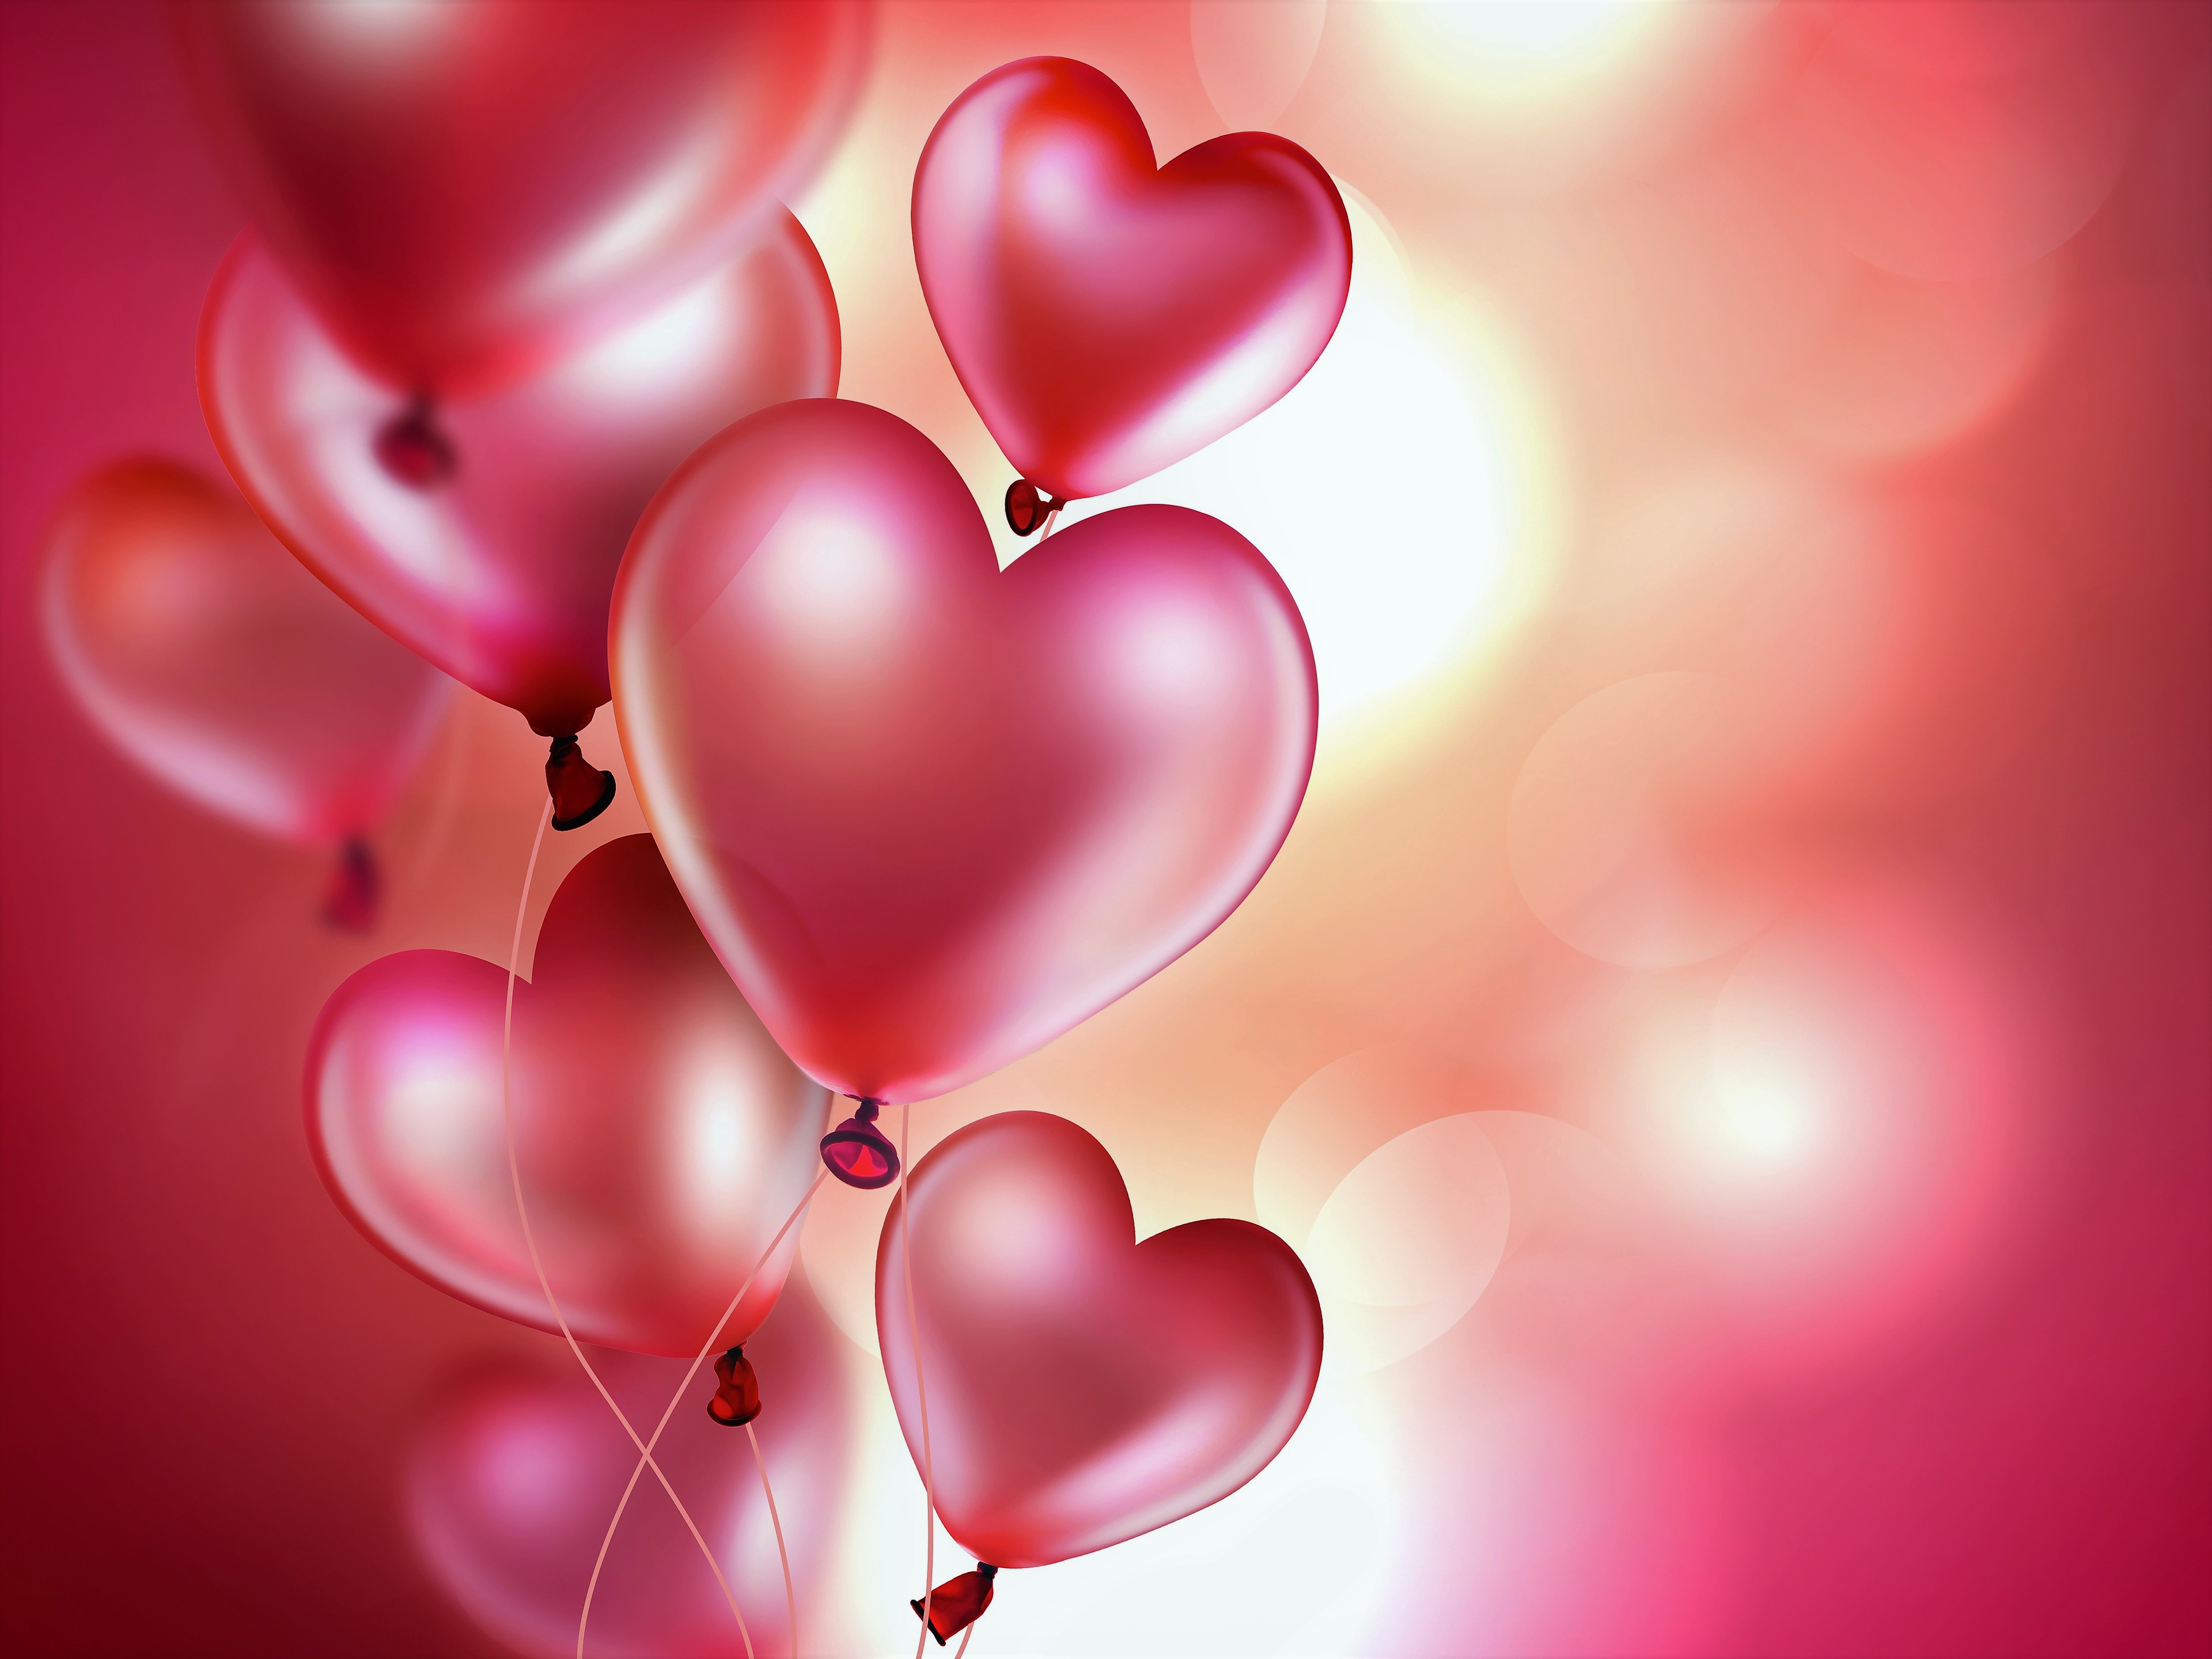 Heart Shaped Balloon Background Images, HD Pictures and Wallpaper For Free  Download | Pngtree